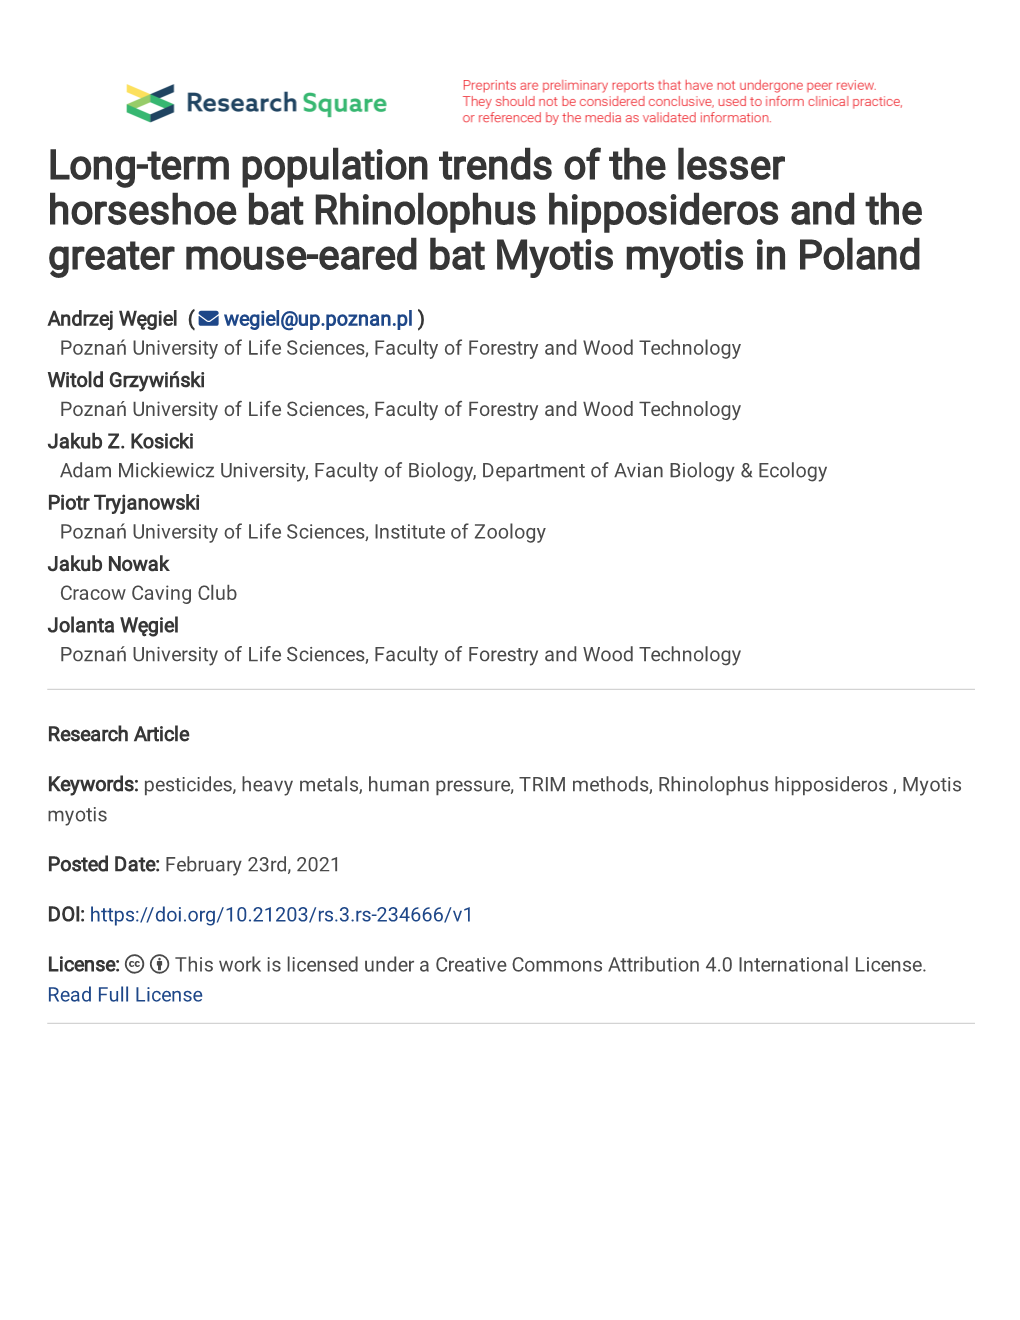 Long-Term Population Trends of the Lesser Horseshoe Bat Rhinolophus Hipposideros and the Greater Mouse-Eared Bat Myotis Myotis in Poland